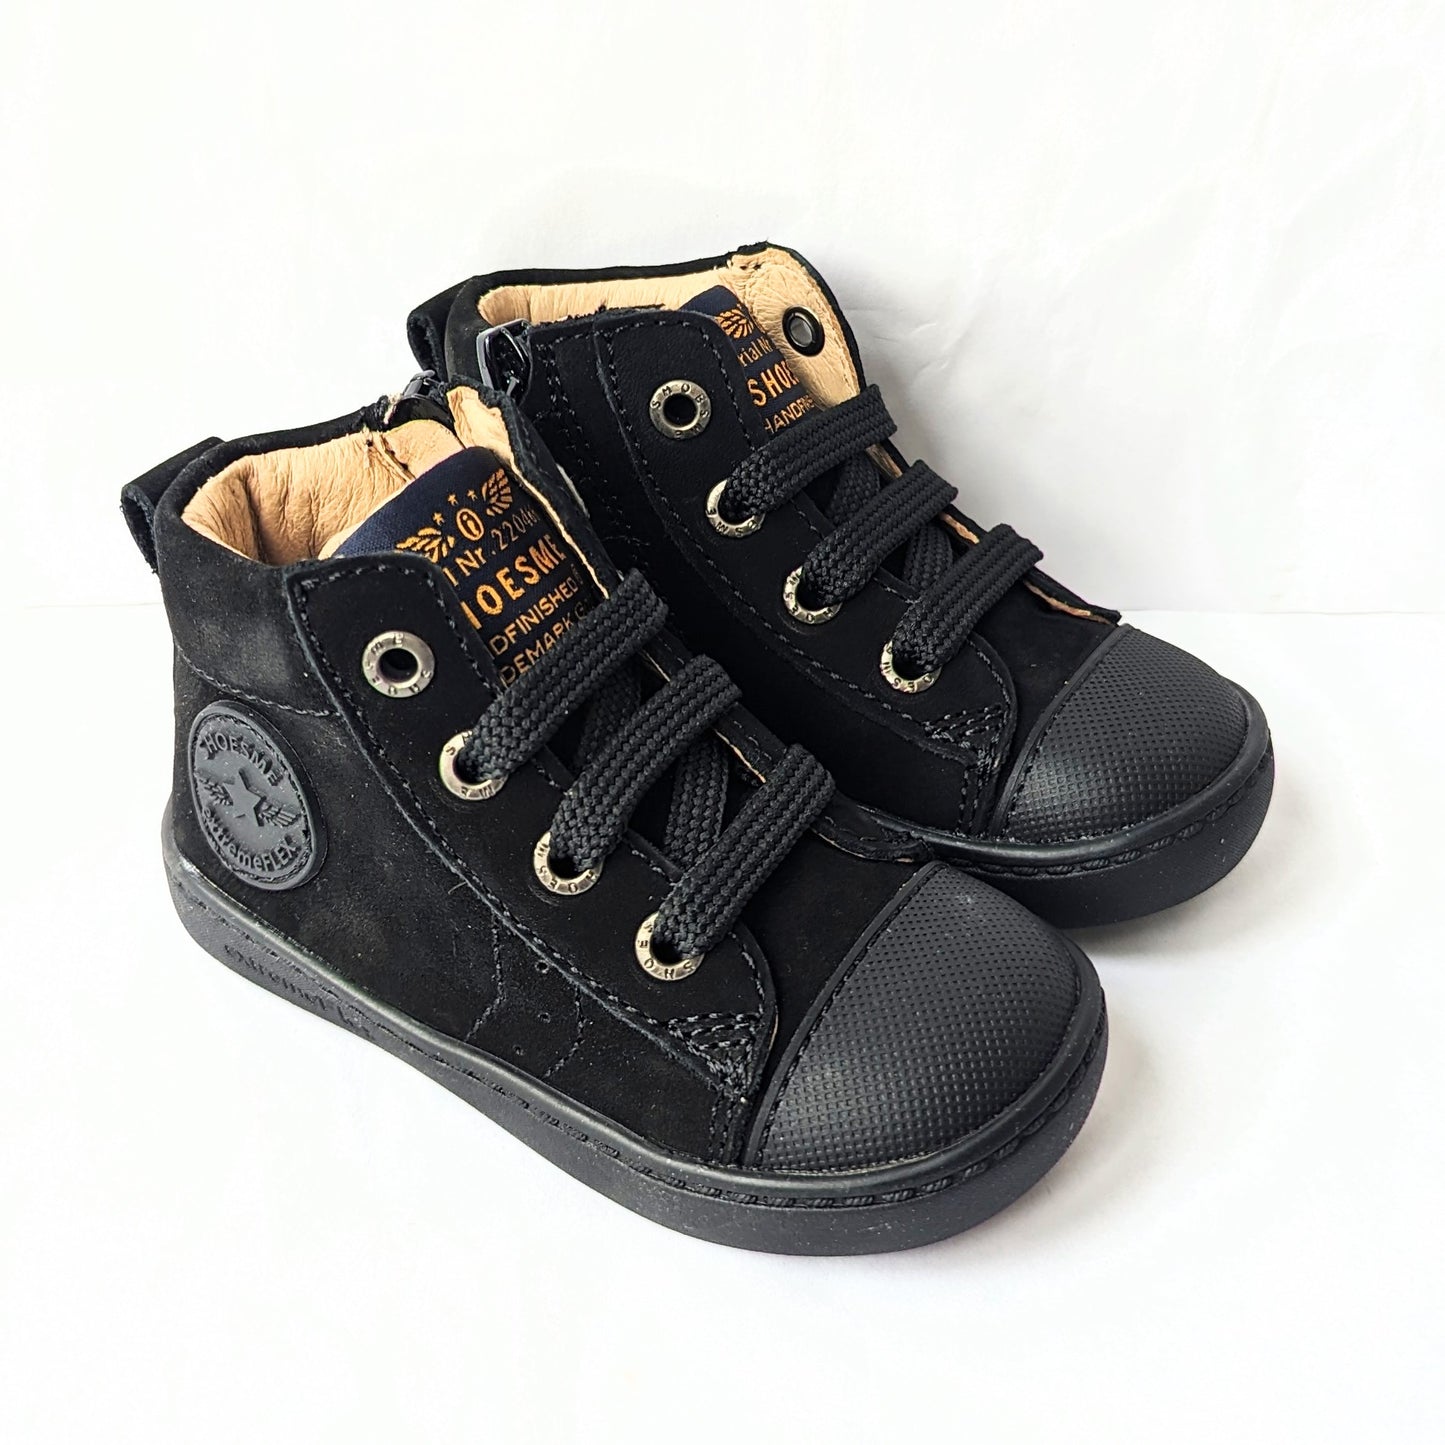 A pair of unisex hi-top boots by Shoesme, style FL23W002-A in black leather nubuck with lace and zip fastening. Angled view.